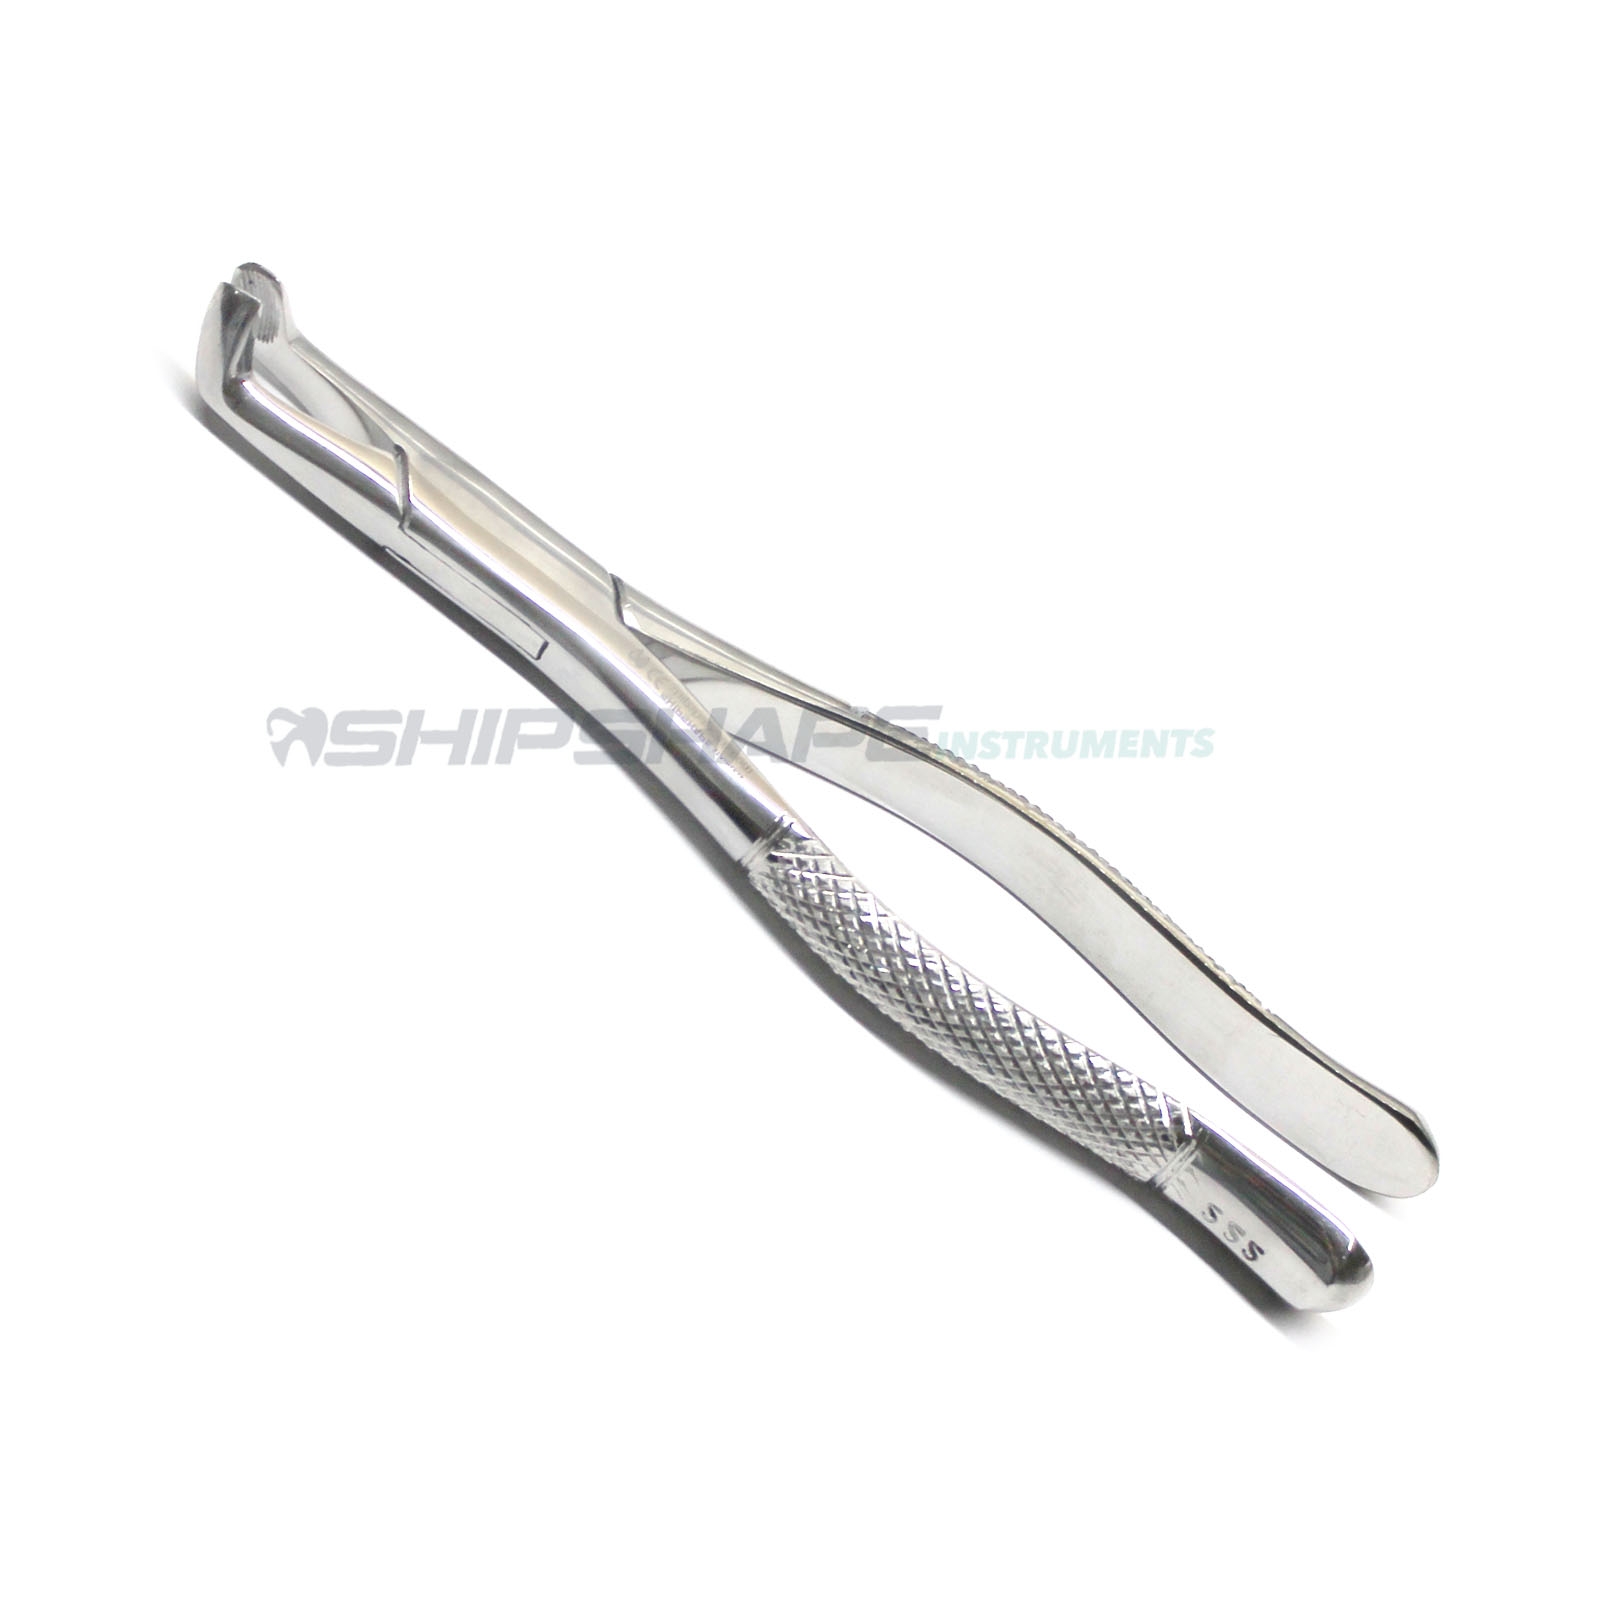 Tooth Extracting Forceps # 222 Predictable Dental Oral Extraction Procedure Tool | Shipshape Instruments-1588